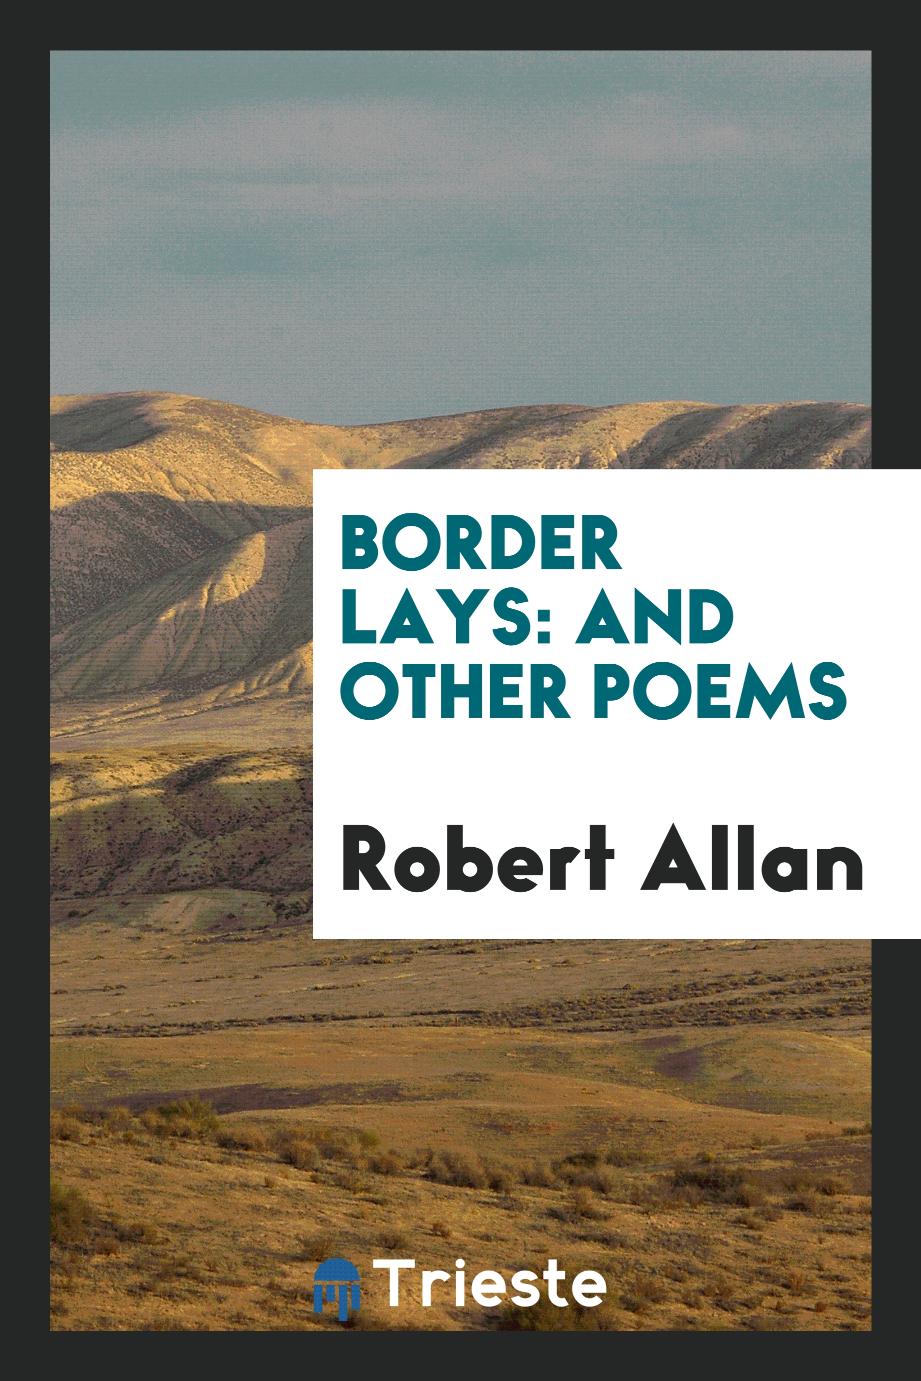 Border Lays: And Other Poems